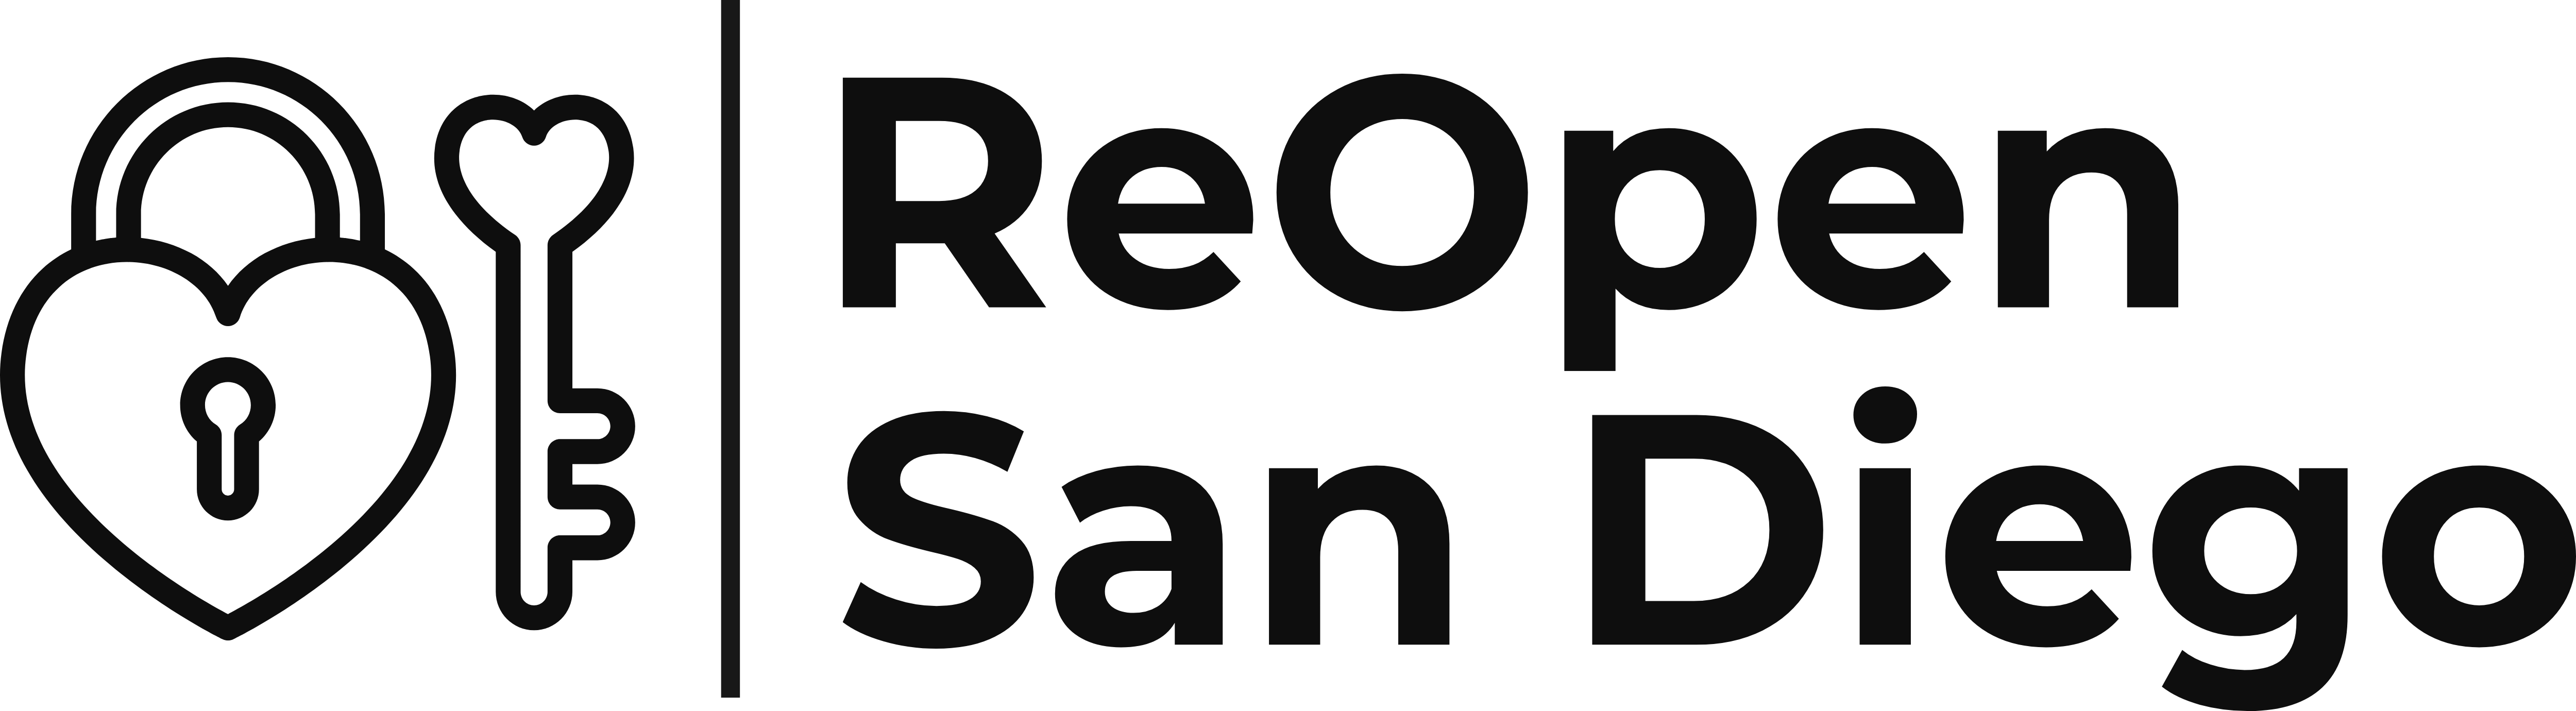 ReOpen San Diego